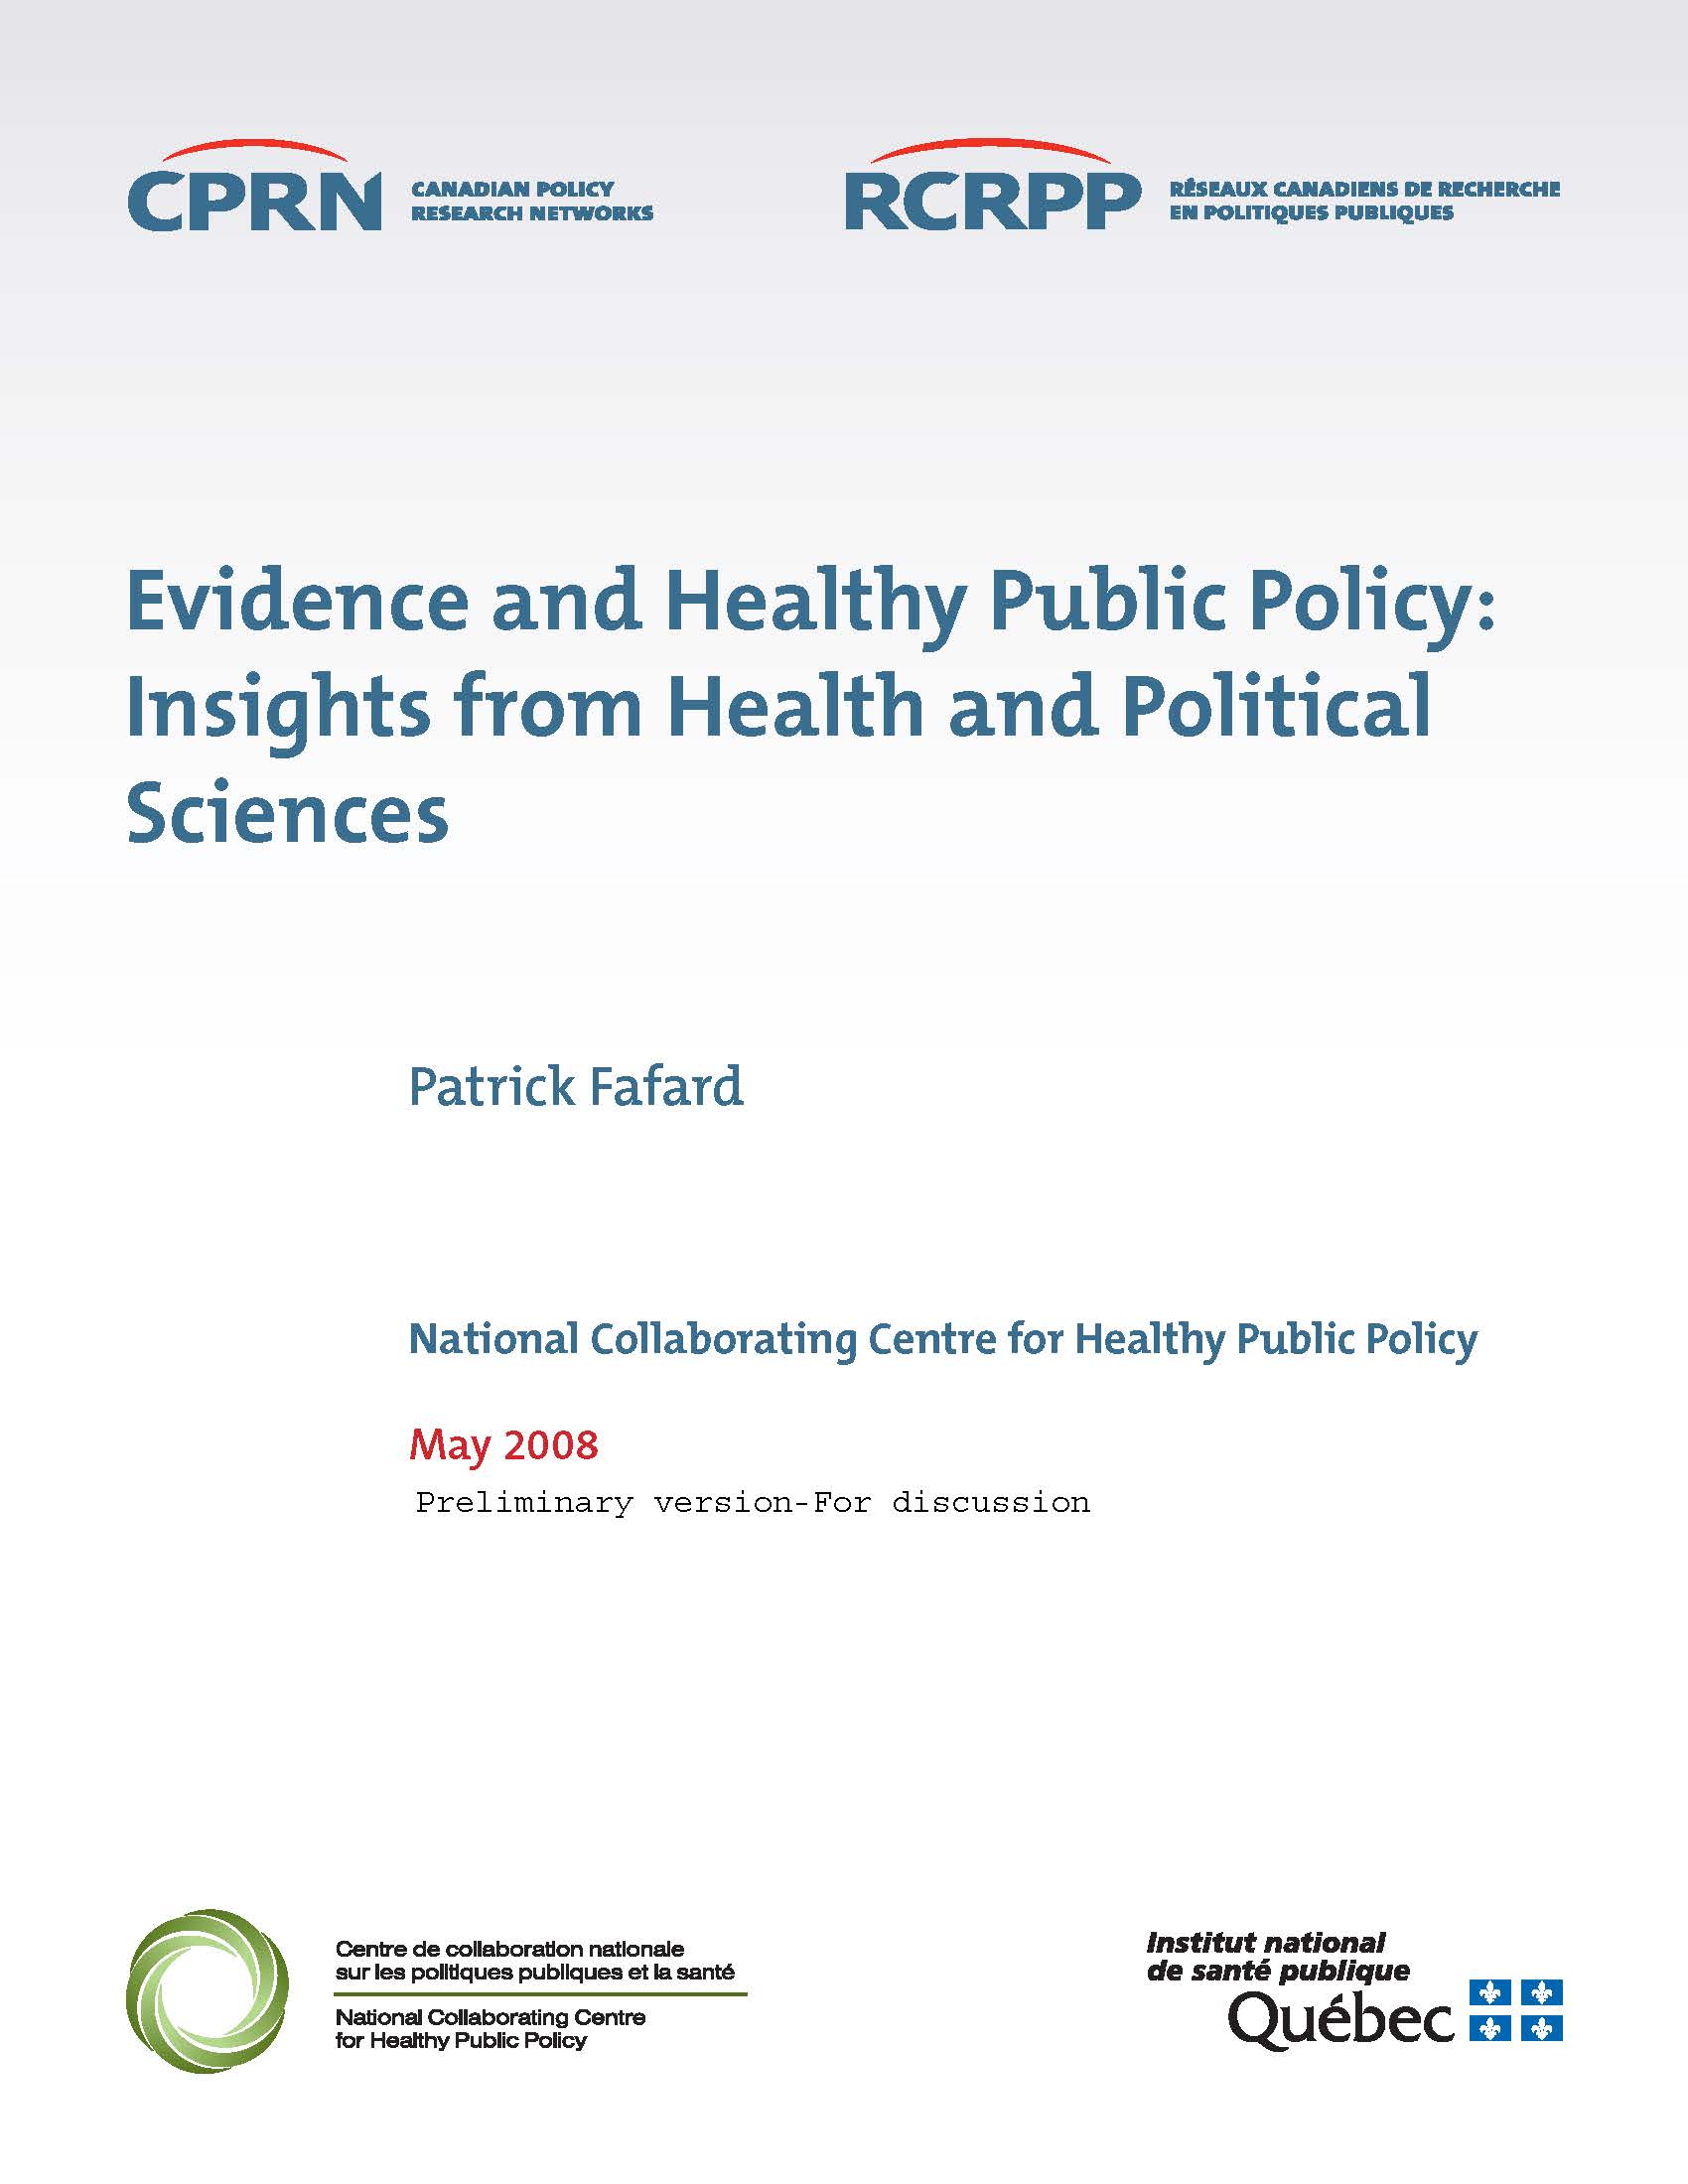 Evidence and Healthy Public Policy: Insights from Health and Political Sciences